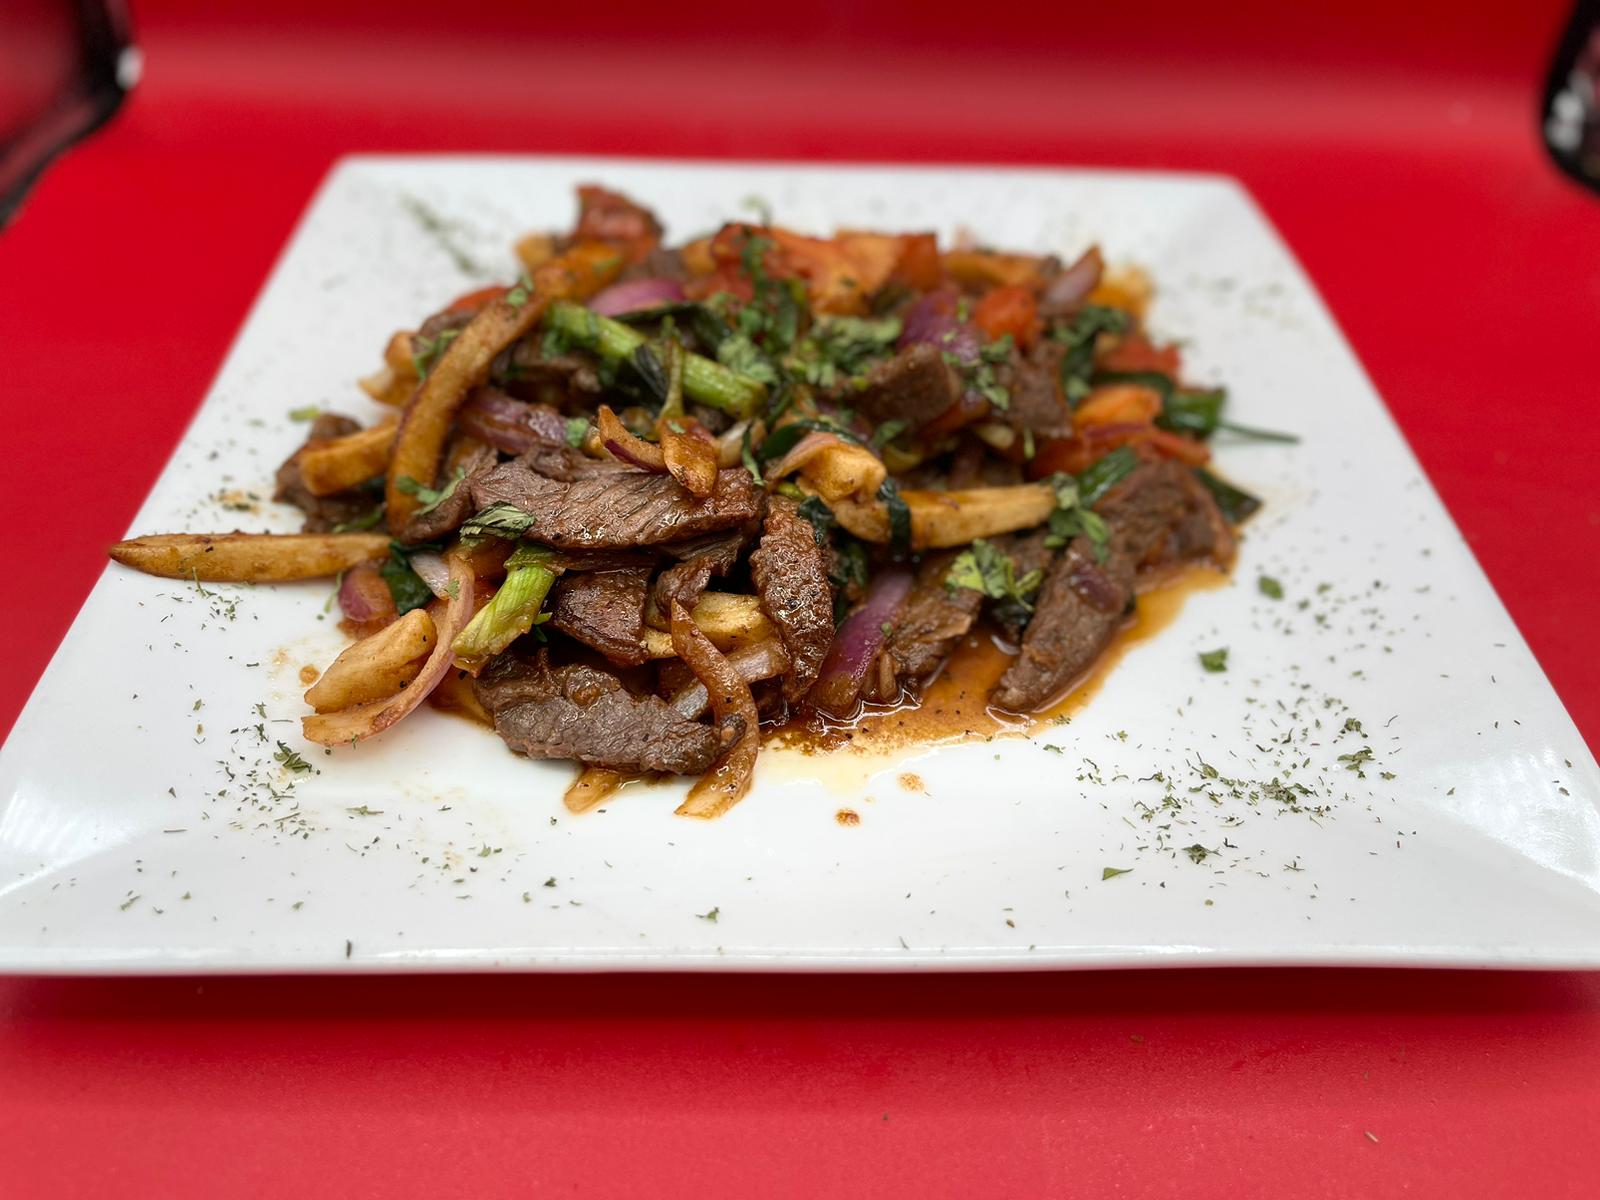 A plate of beef and vegetables on a red plate.